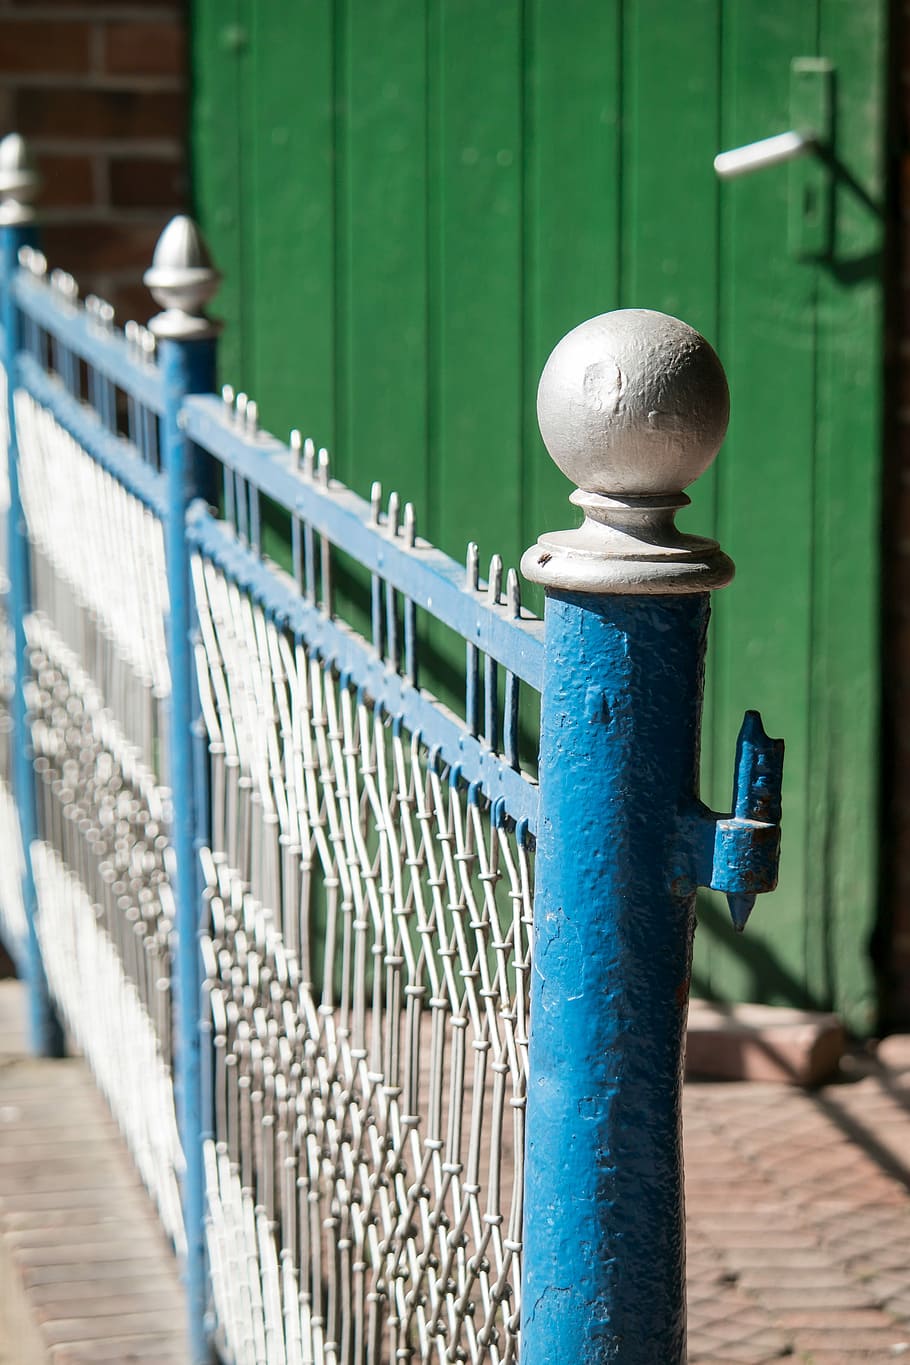 Fence, Knauf, Pile, Post, fence post, door, blue, pillar, day, outdoors